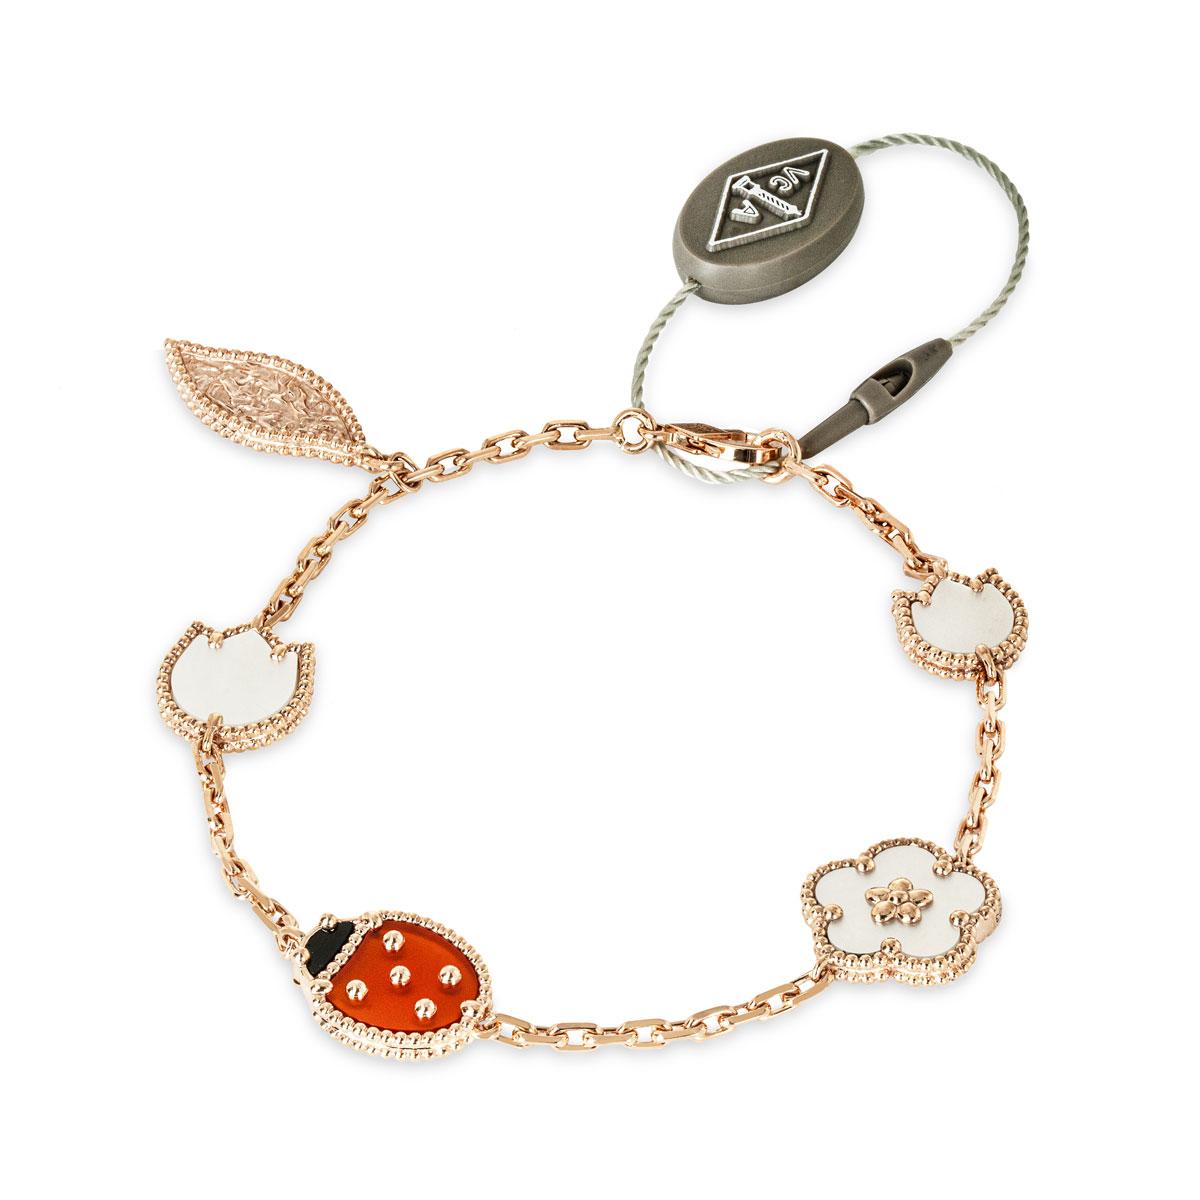 A lovely 18k rose gold, Lucky Alhambra bracelet by Van Cleef & Arpels from the Spring collection. The bracelet features a carnelian and onyx ladybug motif, a single rose gold leaf motif, and finally 3 mother of pearl floral motifs. Measuring 7.3